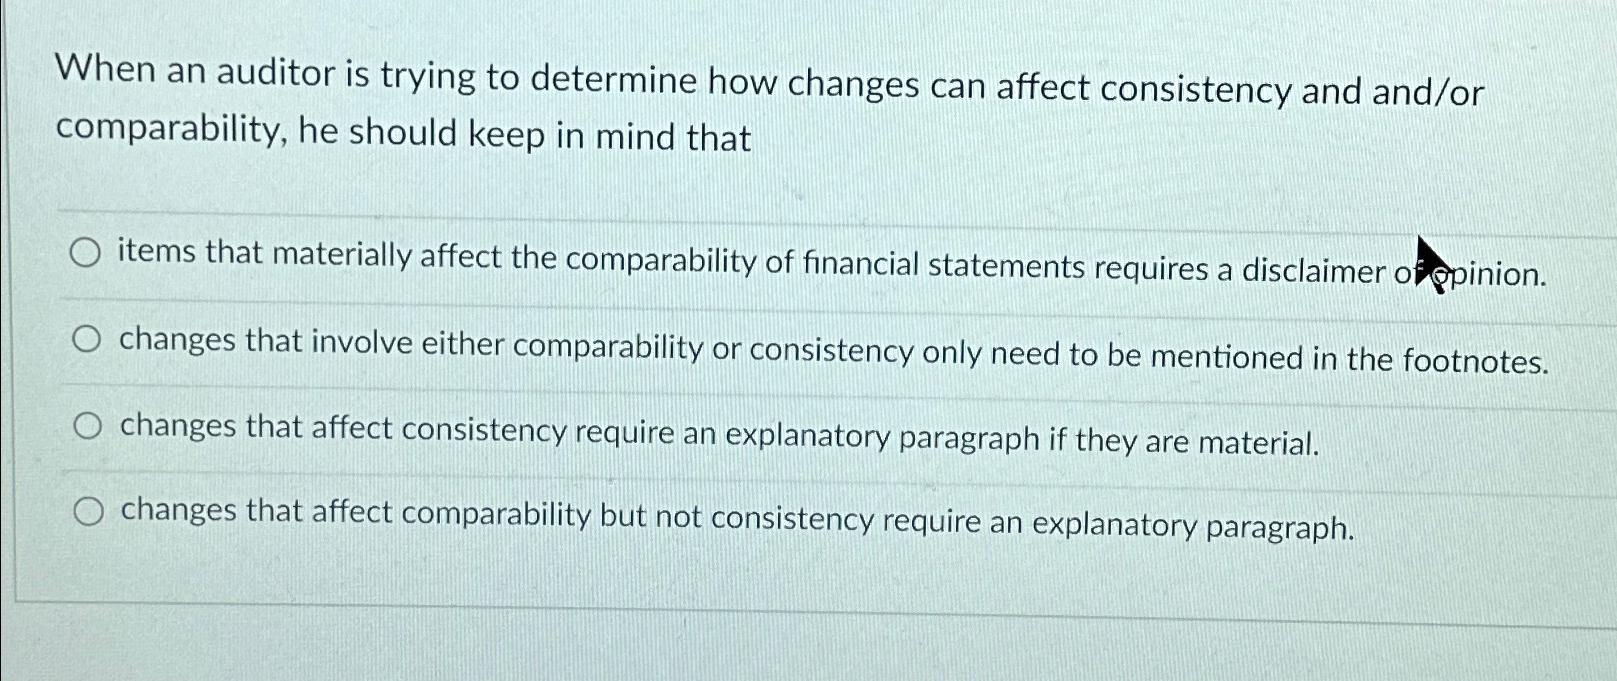 When an auditor is trying to determine how changes can affect consistency and and/or comparability, he should